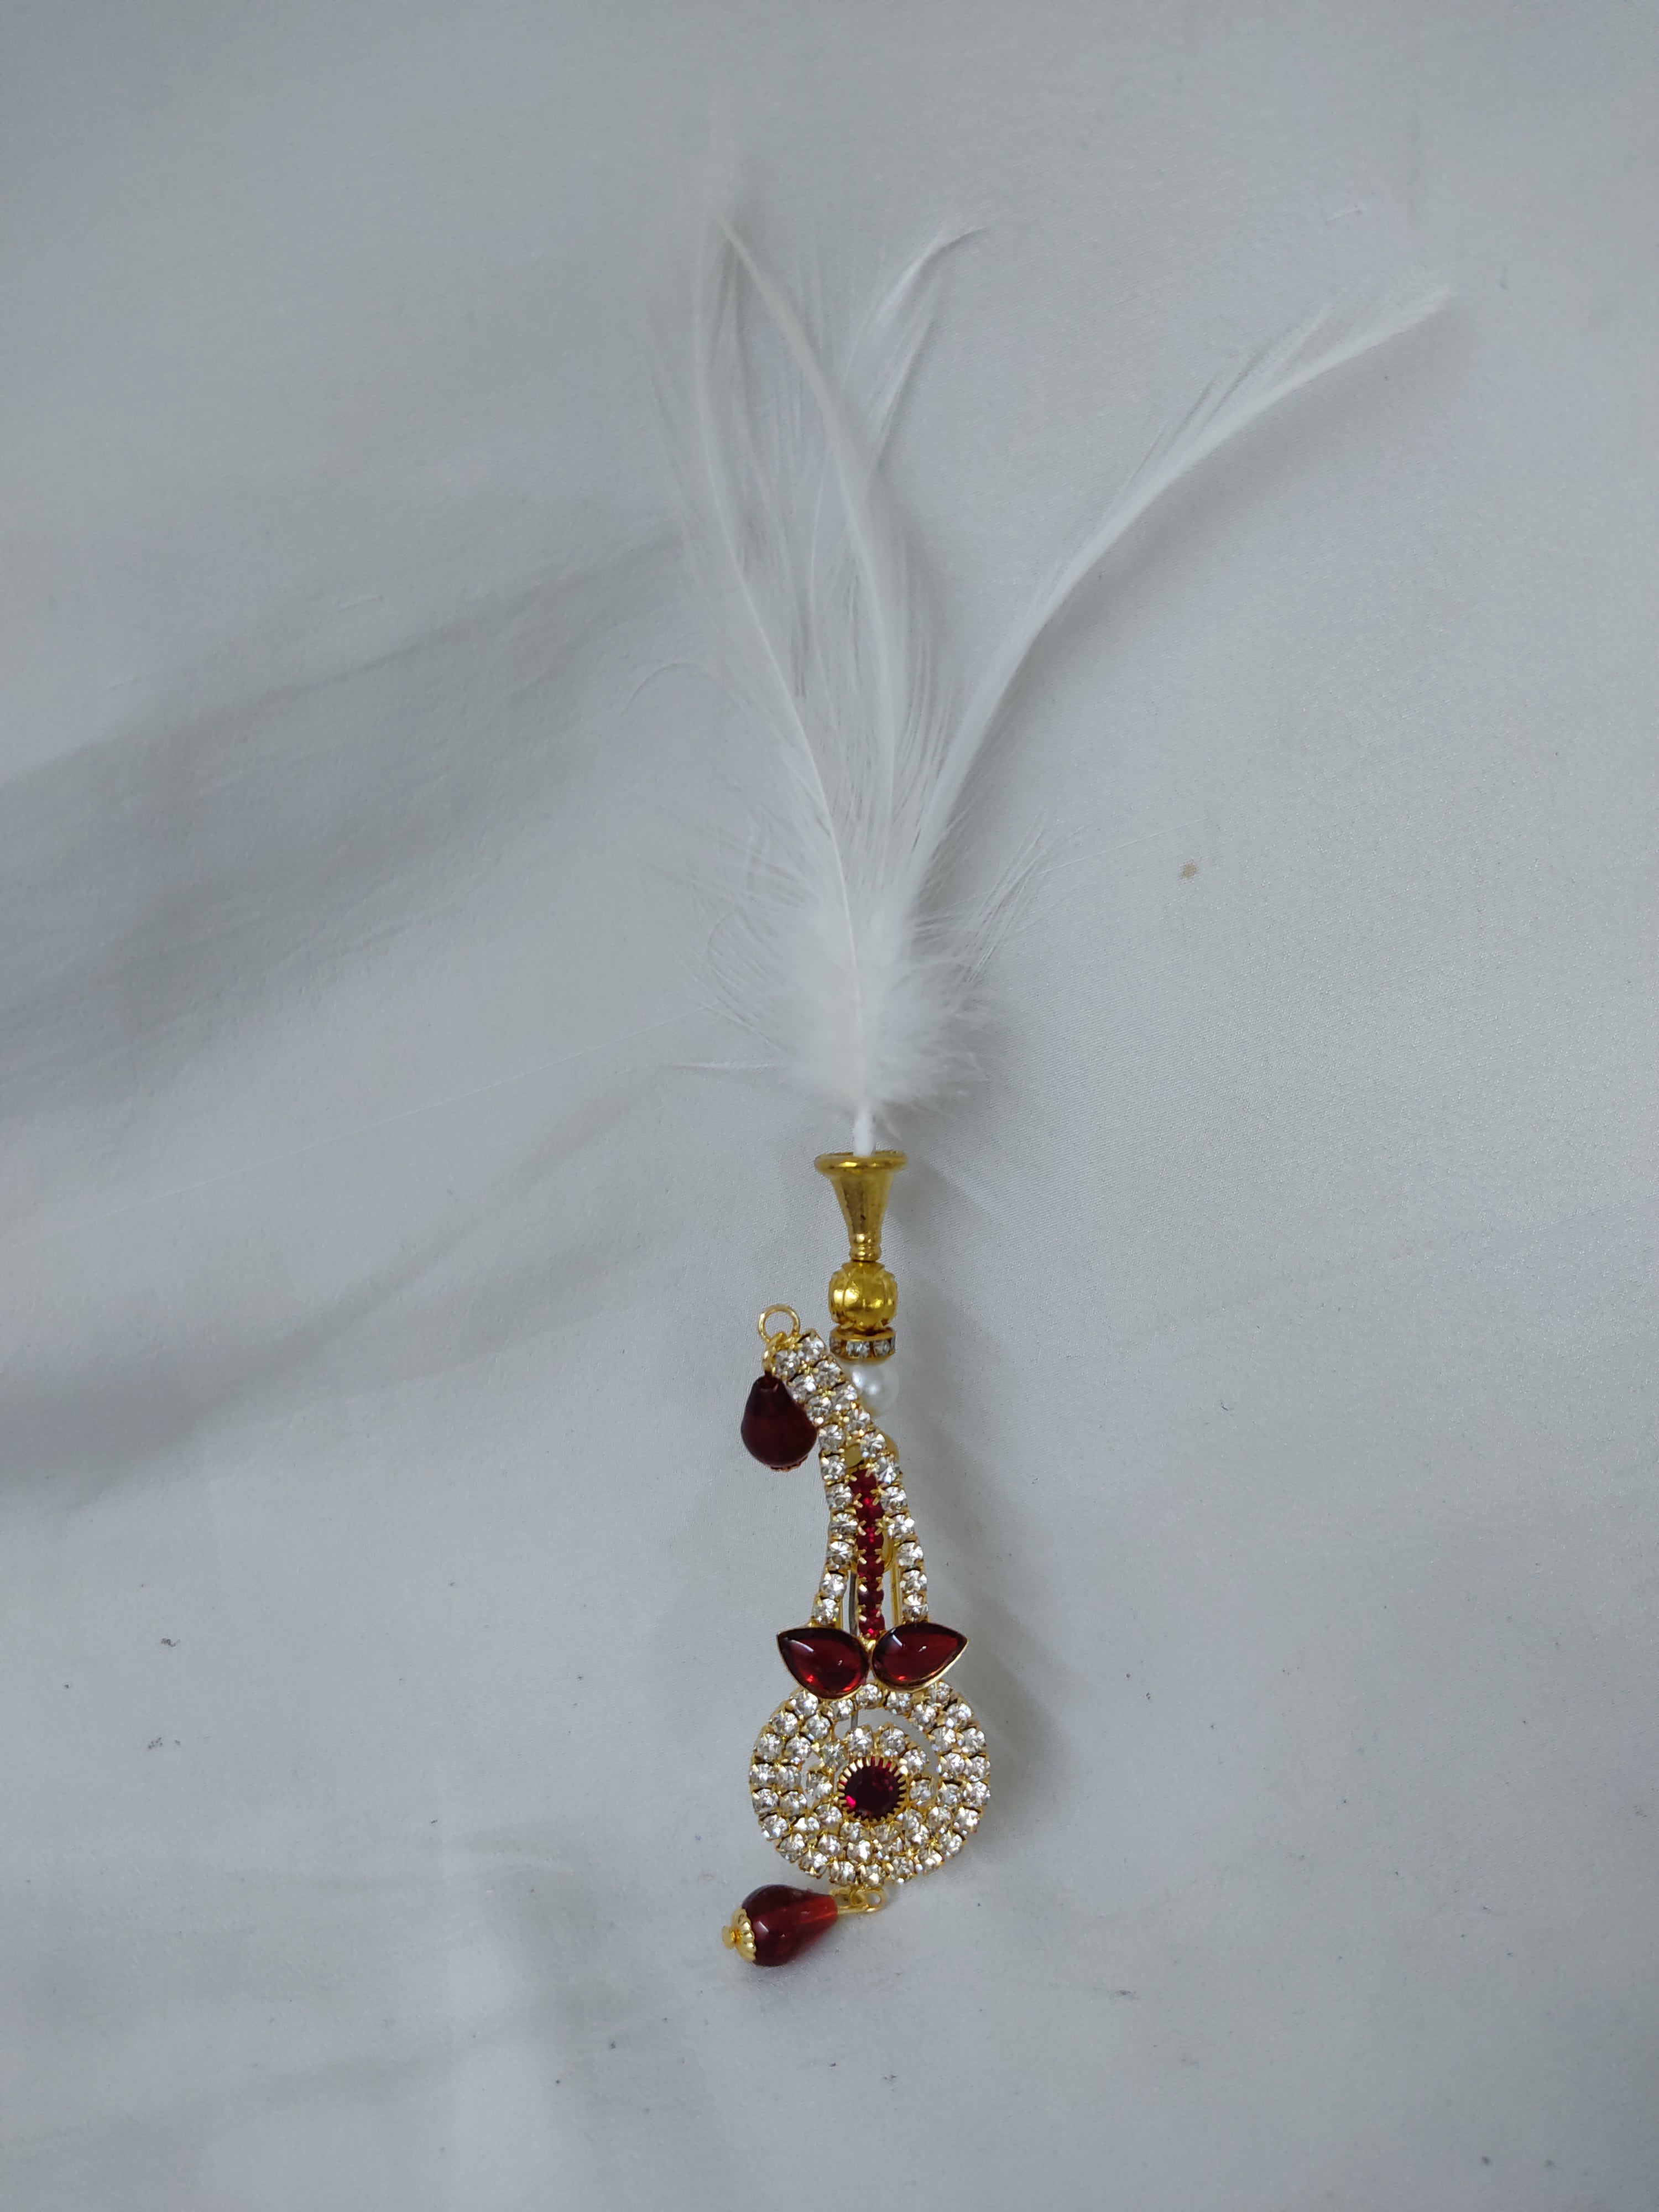 Groom Kalangi Design in Maroon Colour With White Stones and Fur